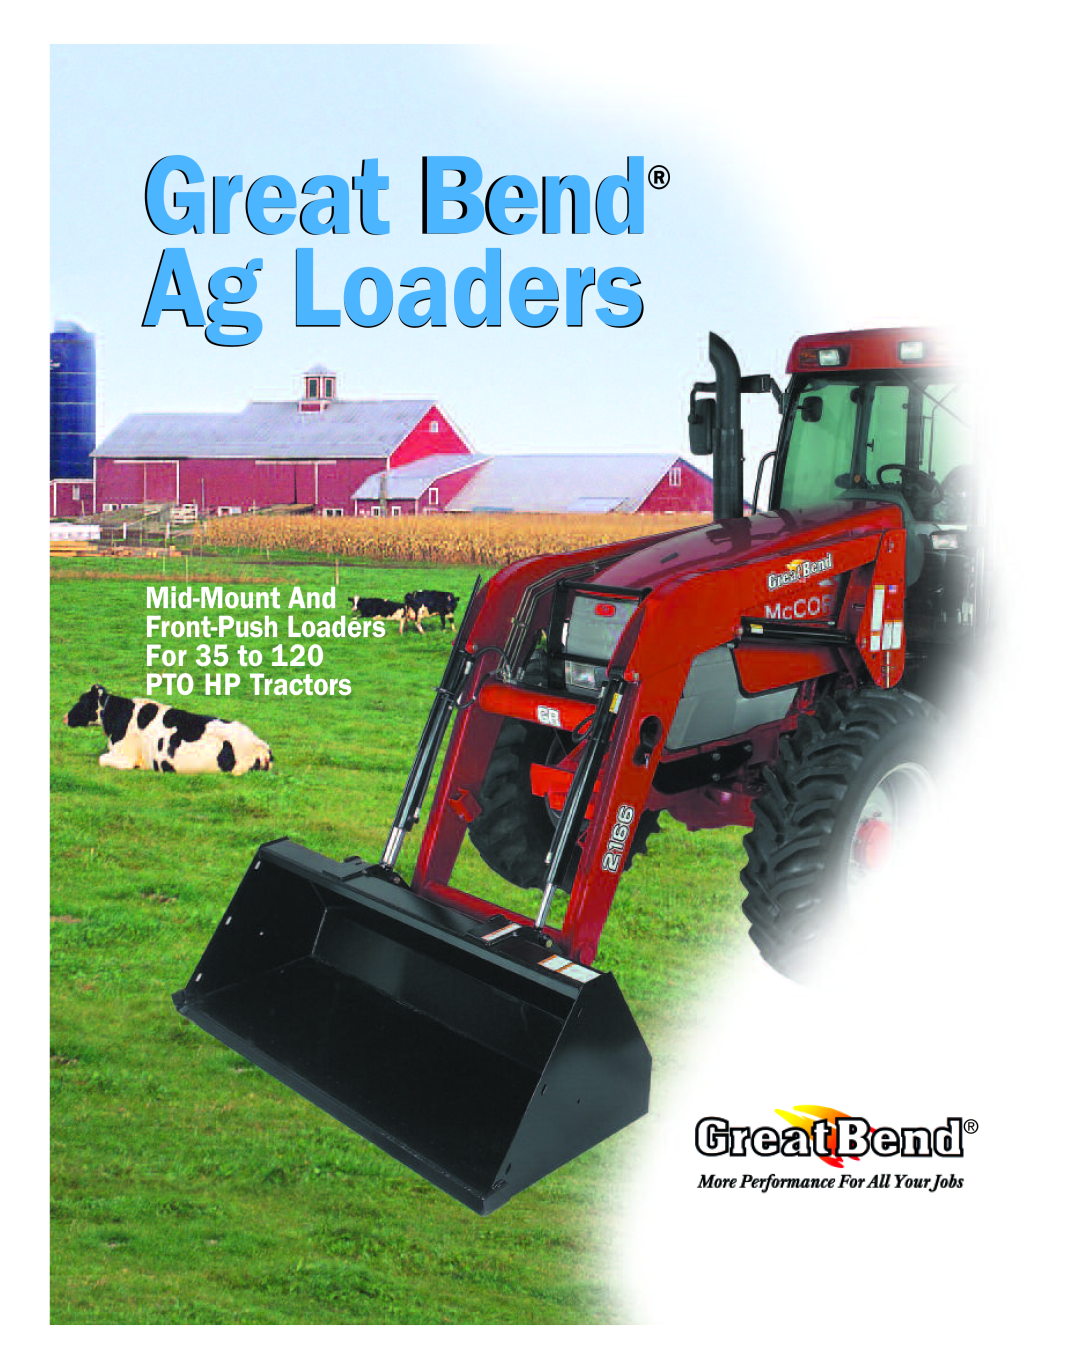 Bush Hog manual Great Bend Ag Loaders, Mid-MountAnd Front-PushLoaders For 35 to, PTO HP Tractors 